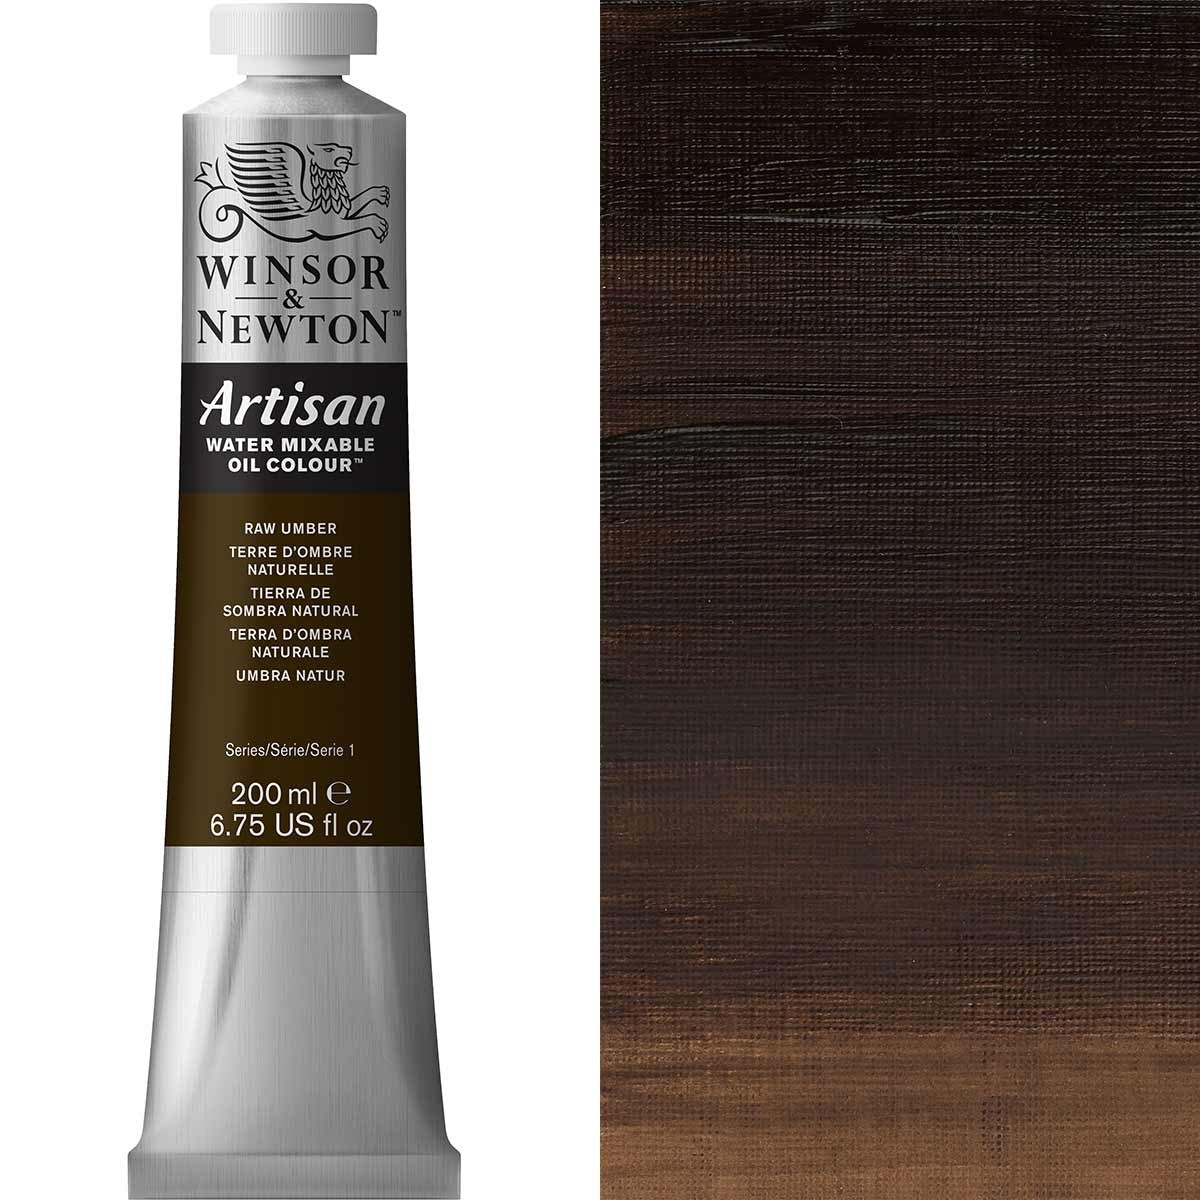 Winsor and Newton - Artisan Oil Colour Watermixable - 200ml - Raw Umber